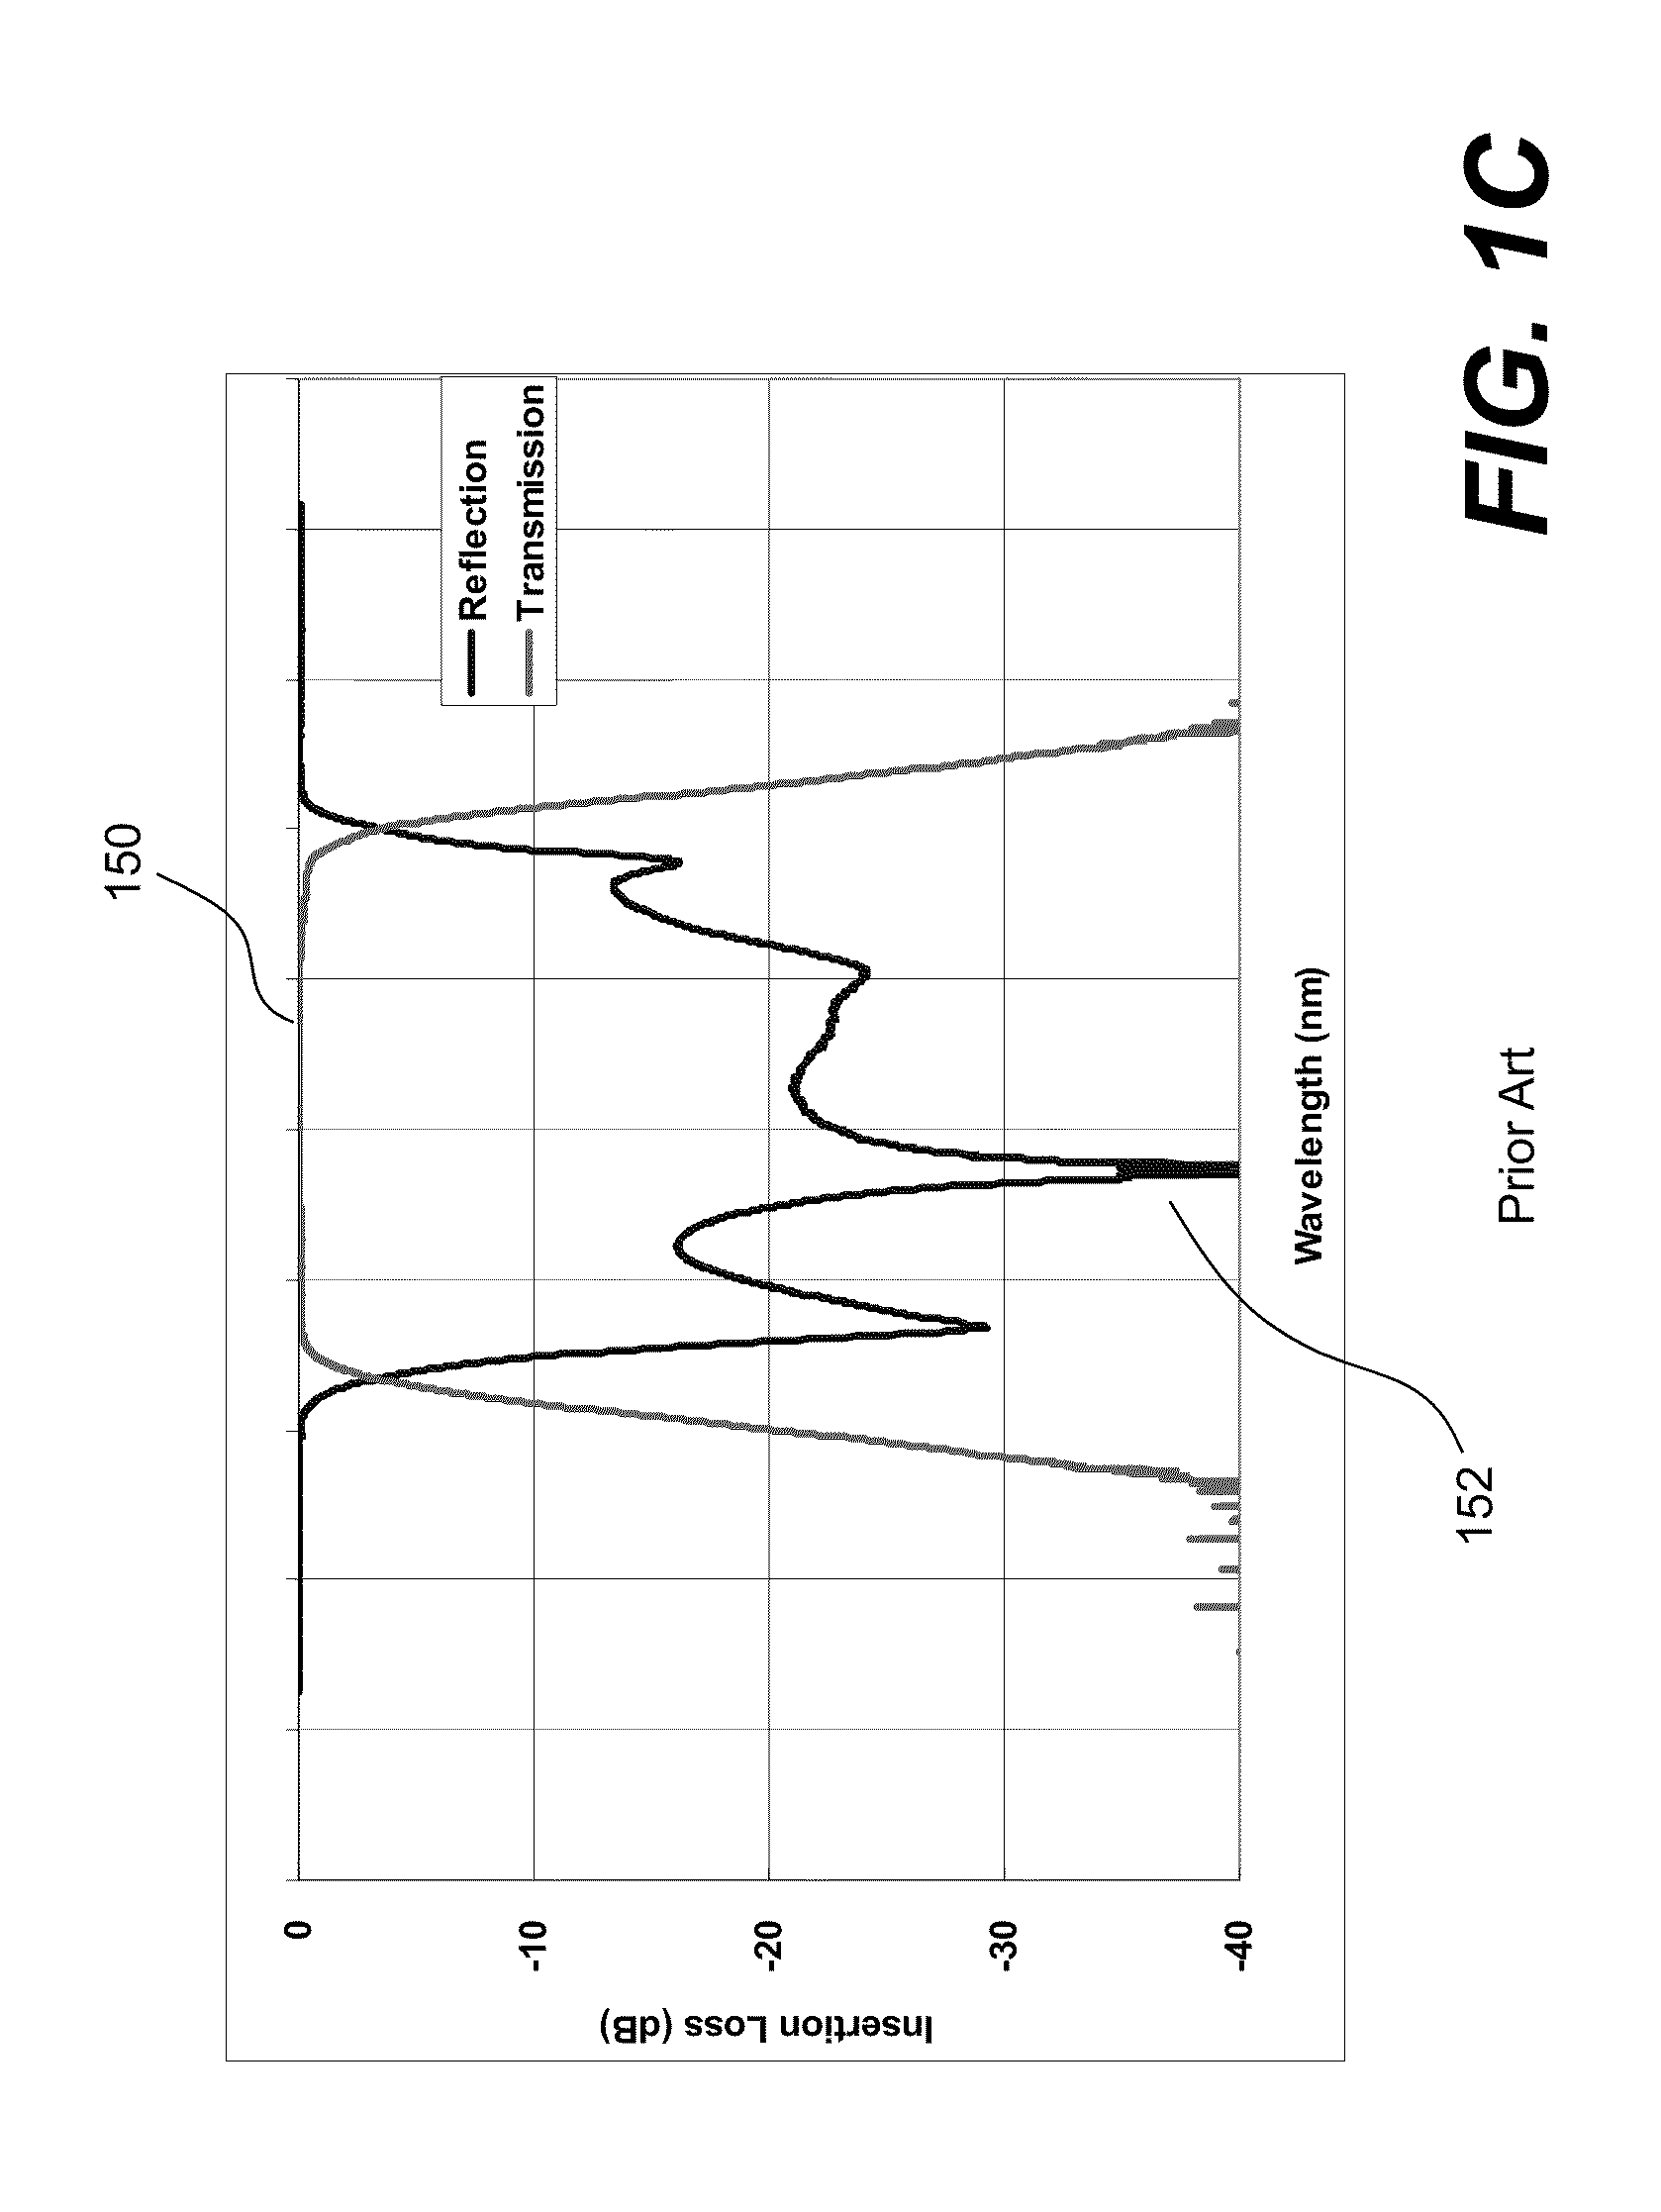 High isolation wavelength division devices